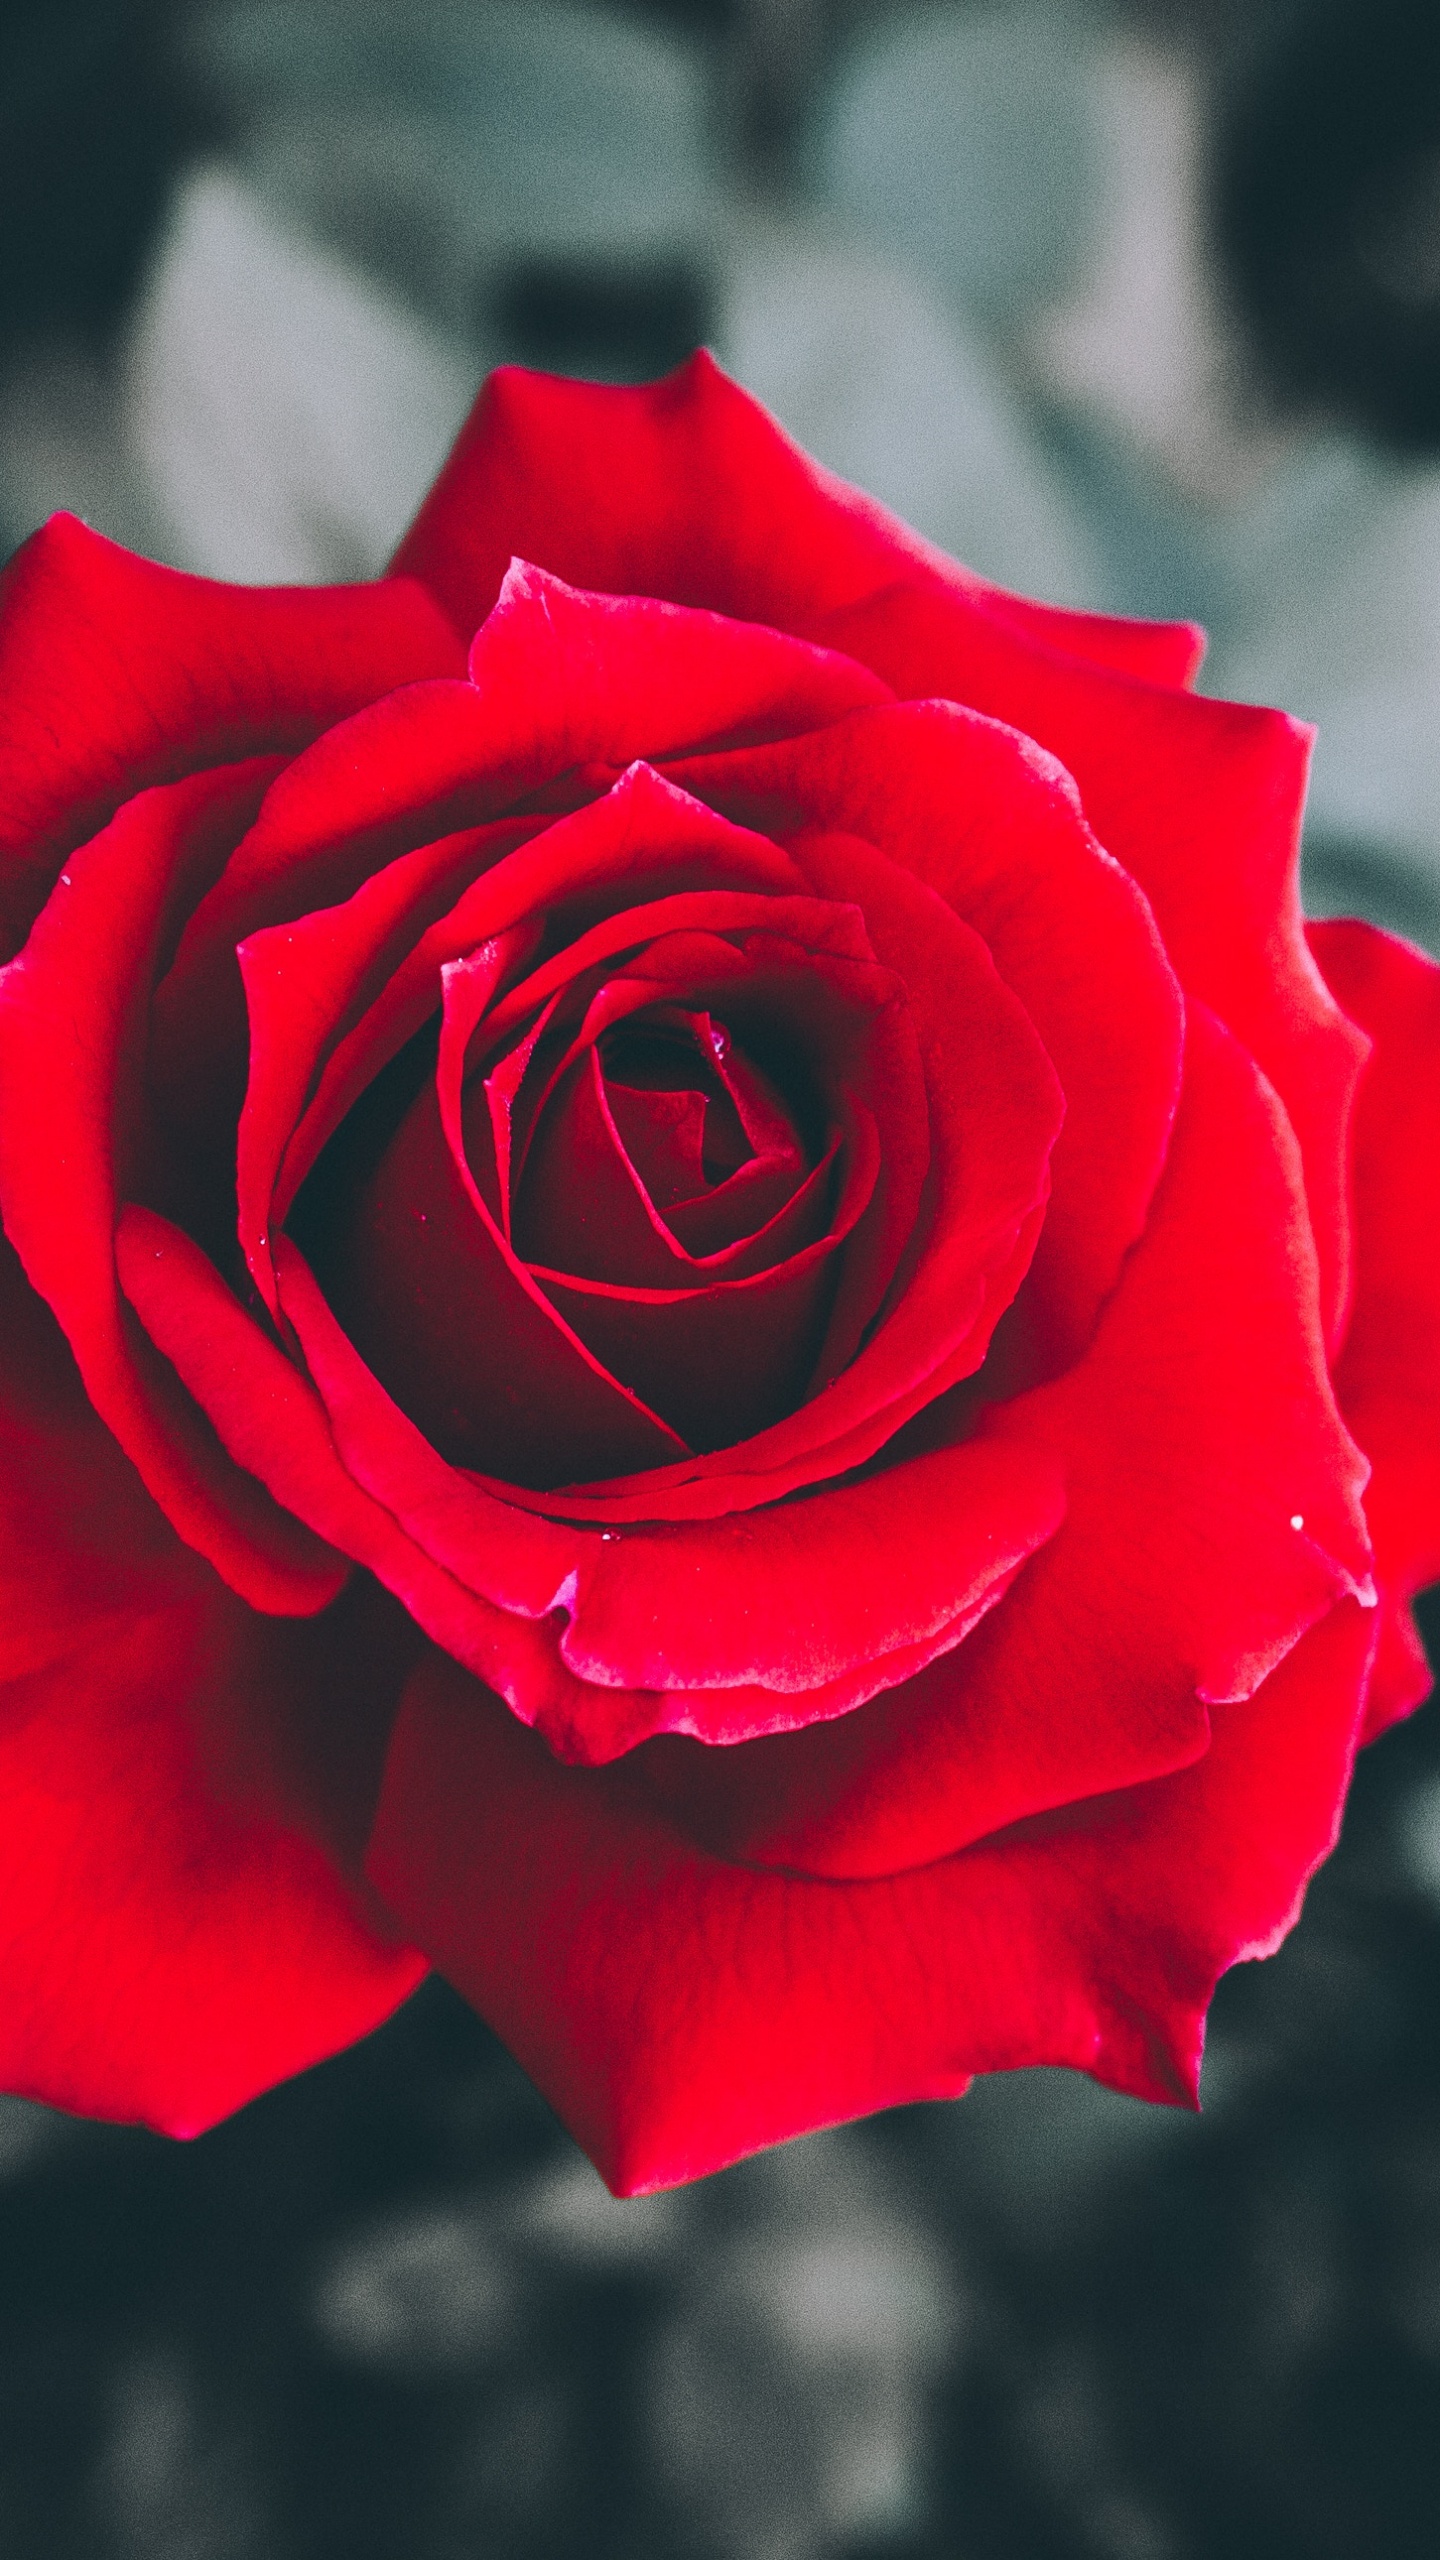 Red Rose in Bloom in Close up Photography. Wallpaper in 1440x2560 Resolution